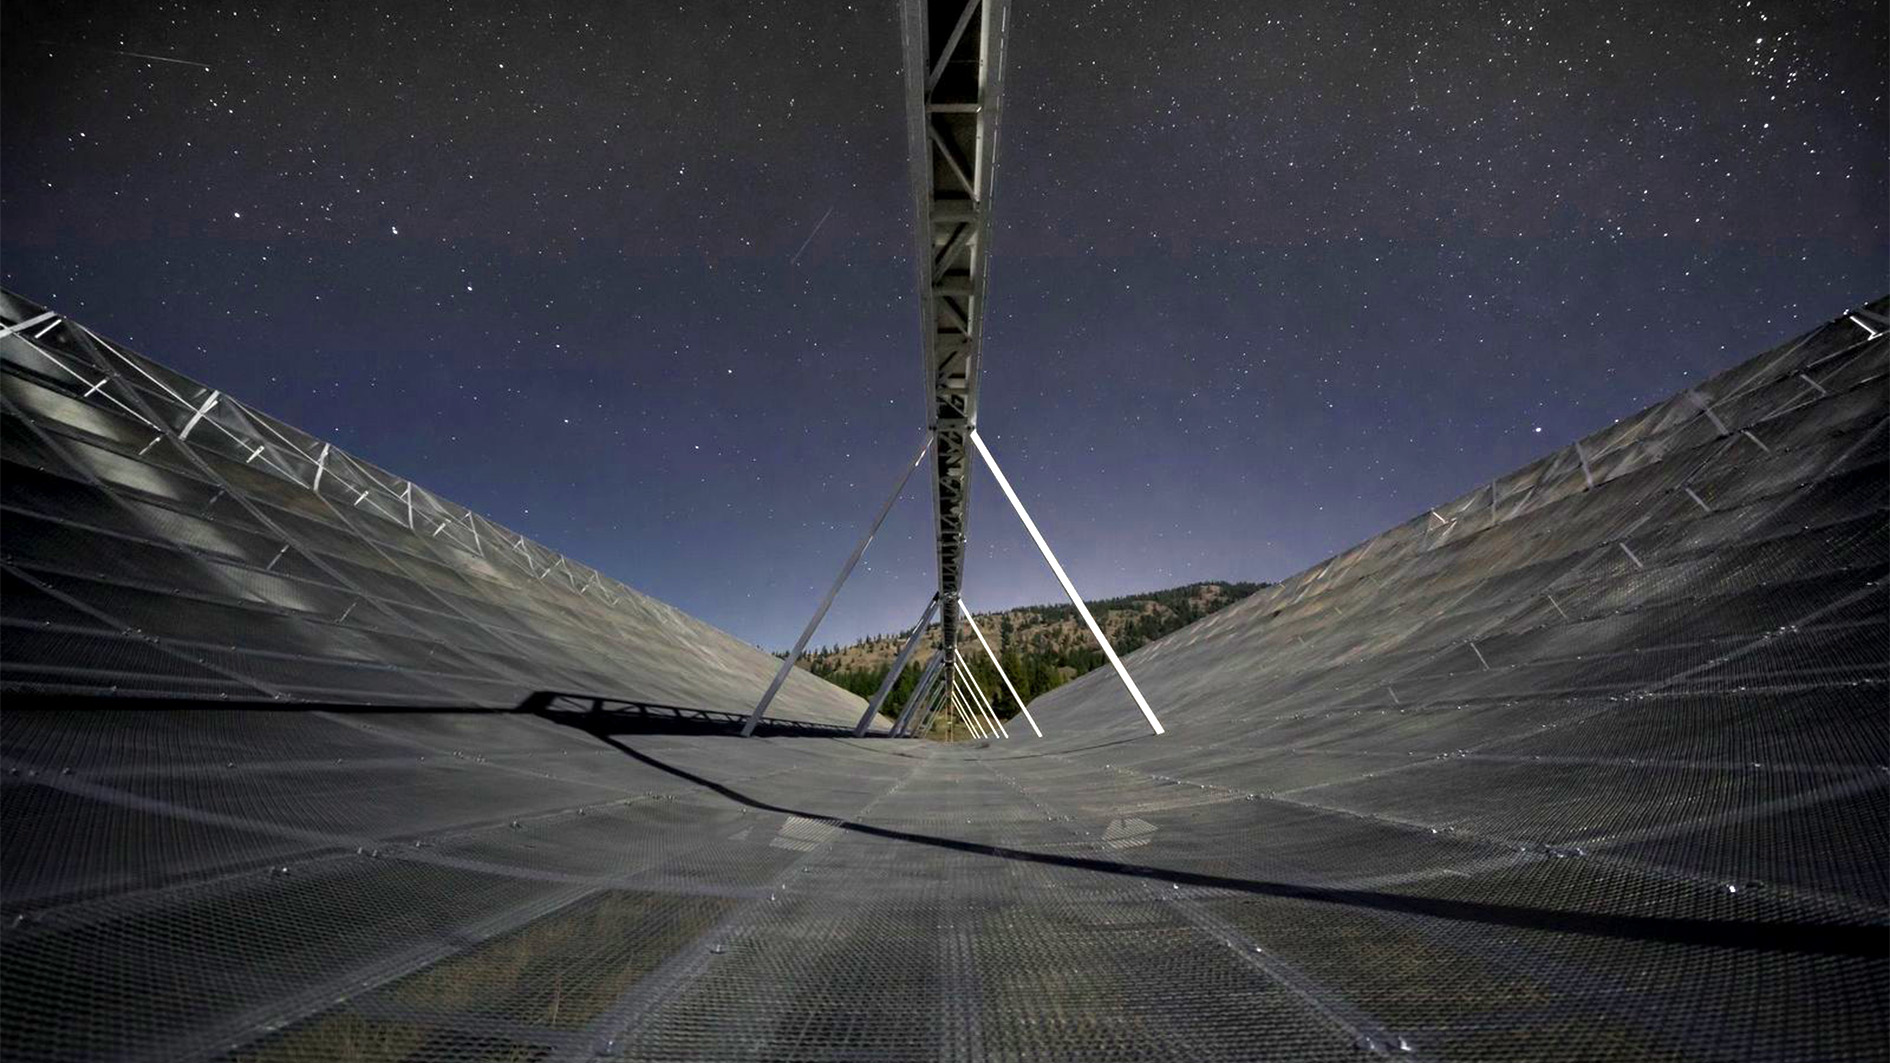 CHIME telescope detects more than 500 mysterious fast radio bursts in first operation year